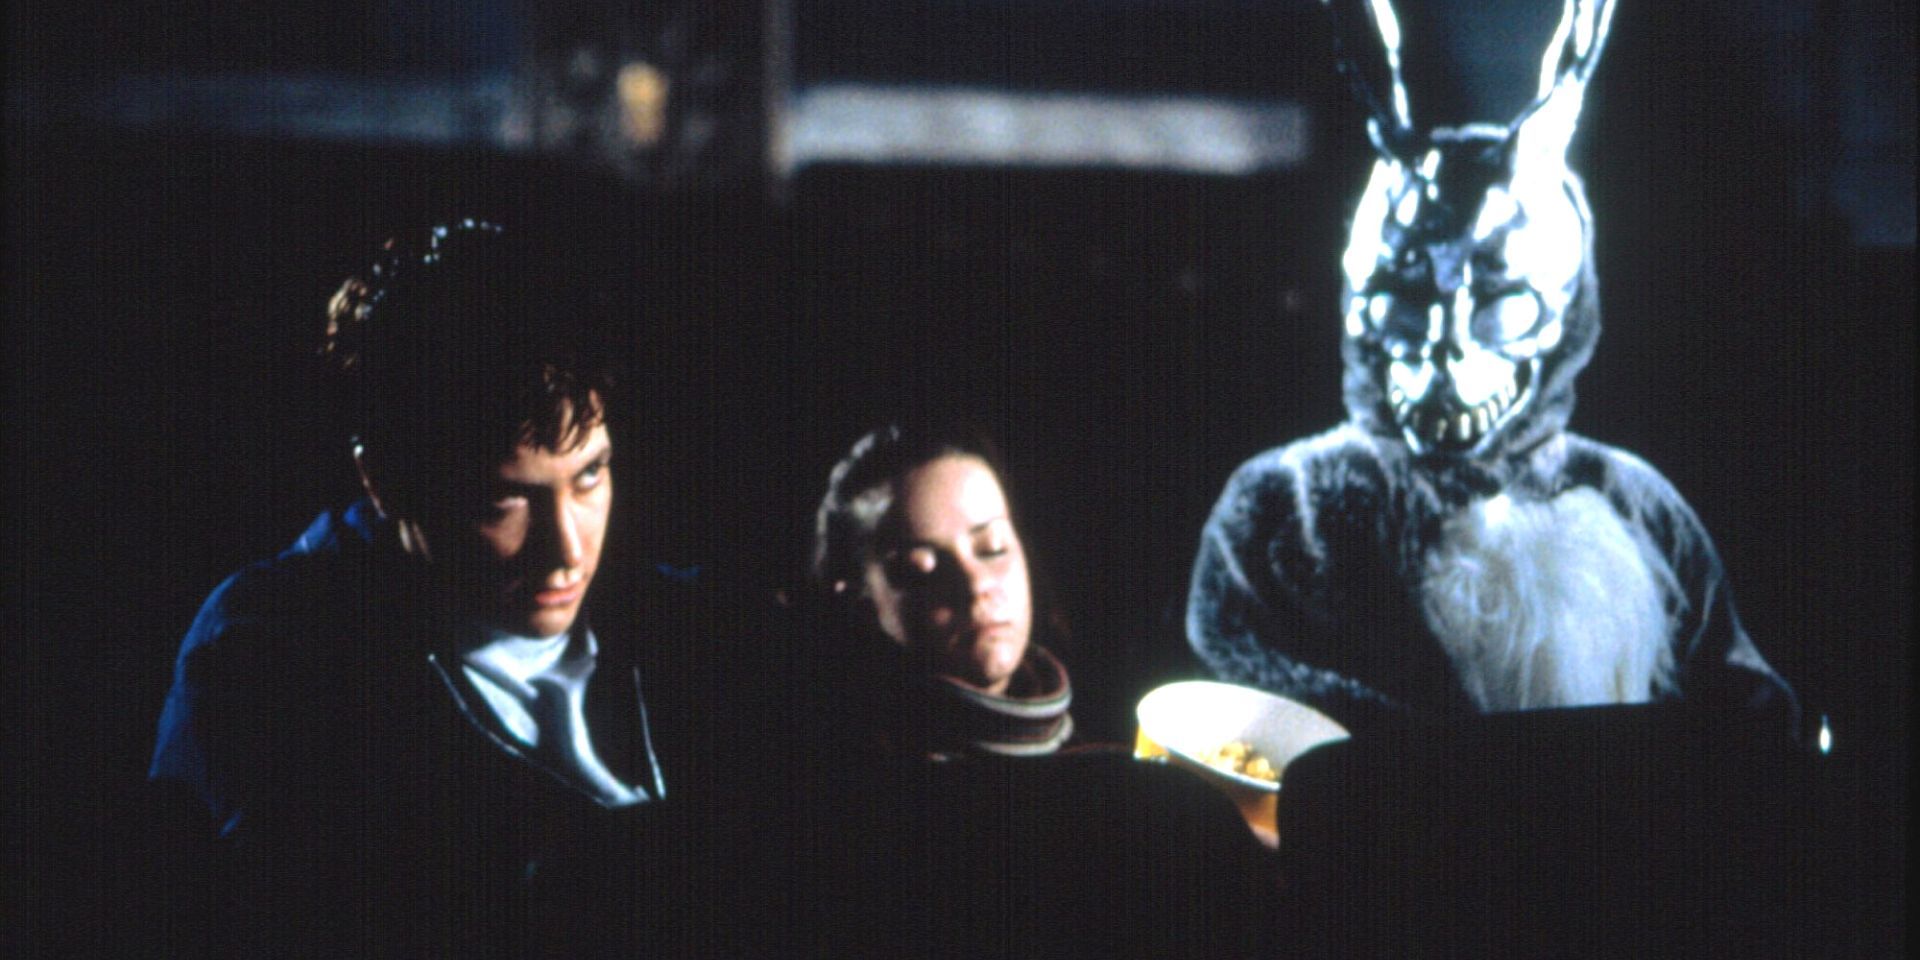 Donnie and Frank the Rabbit in the cinema in the Butterfly Effect-like Donnie Darko